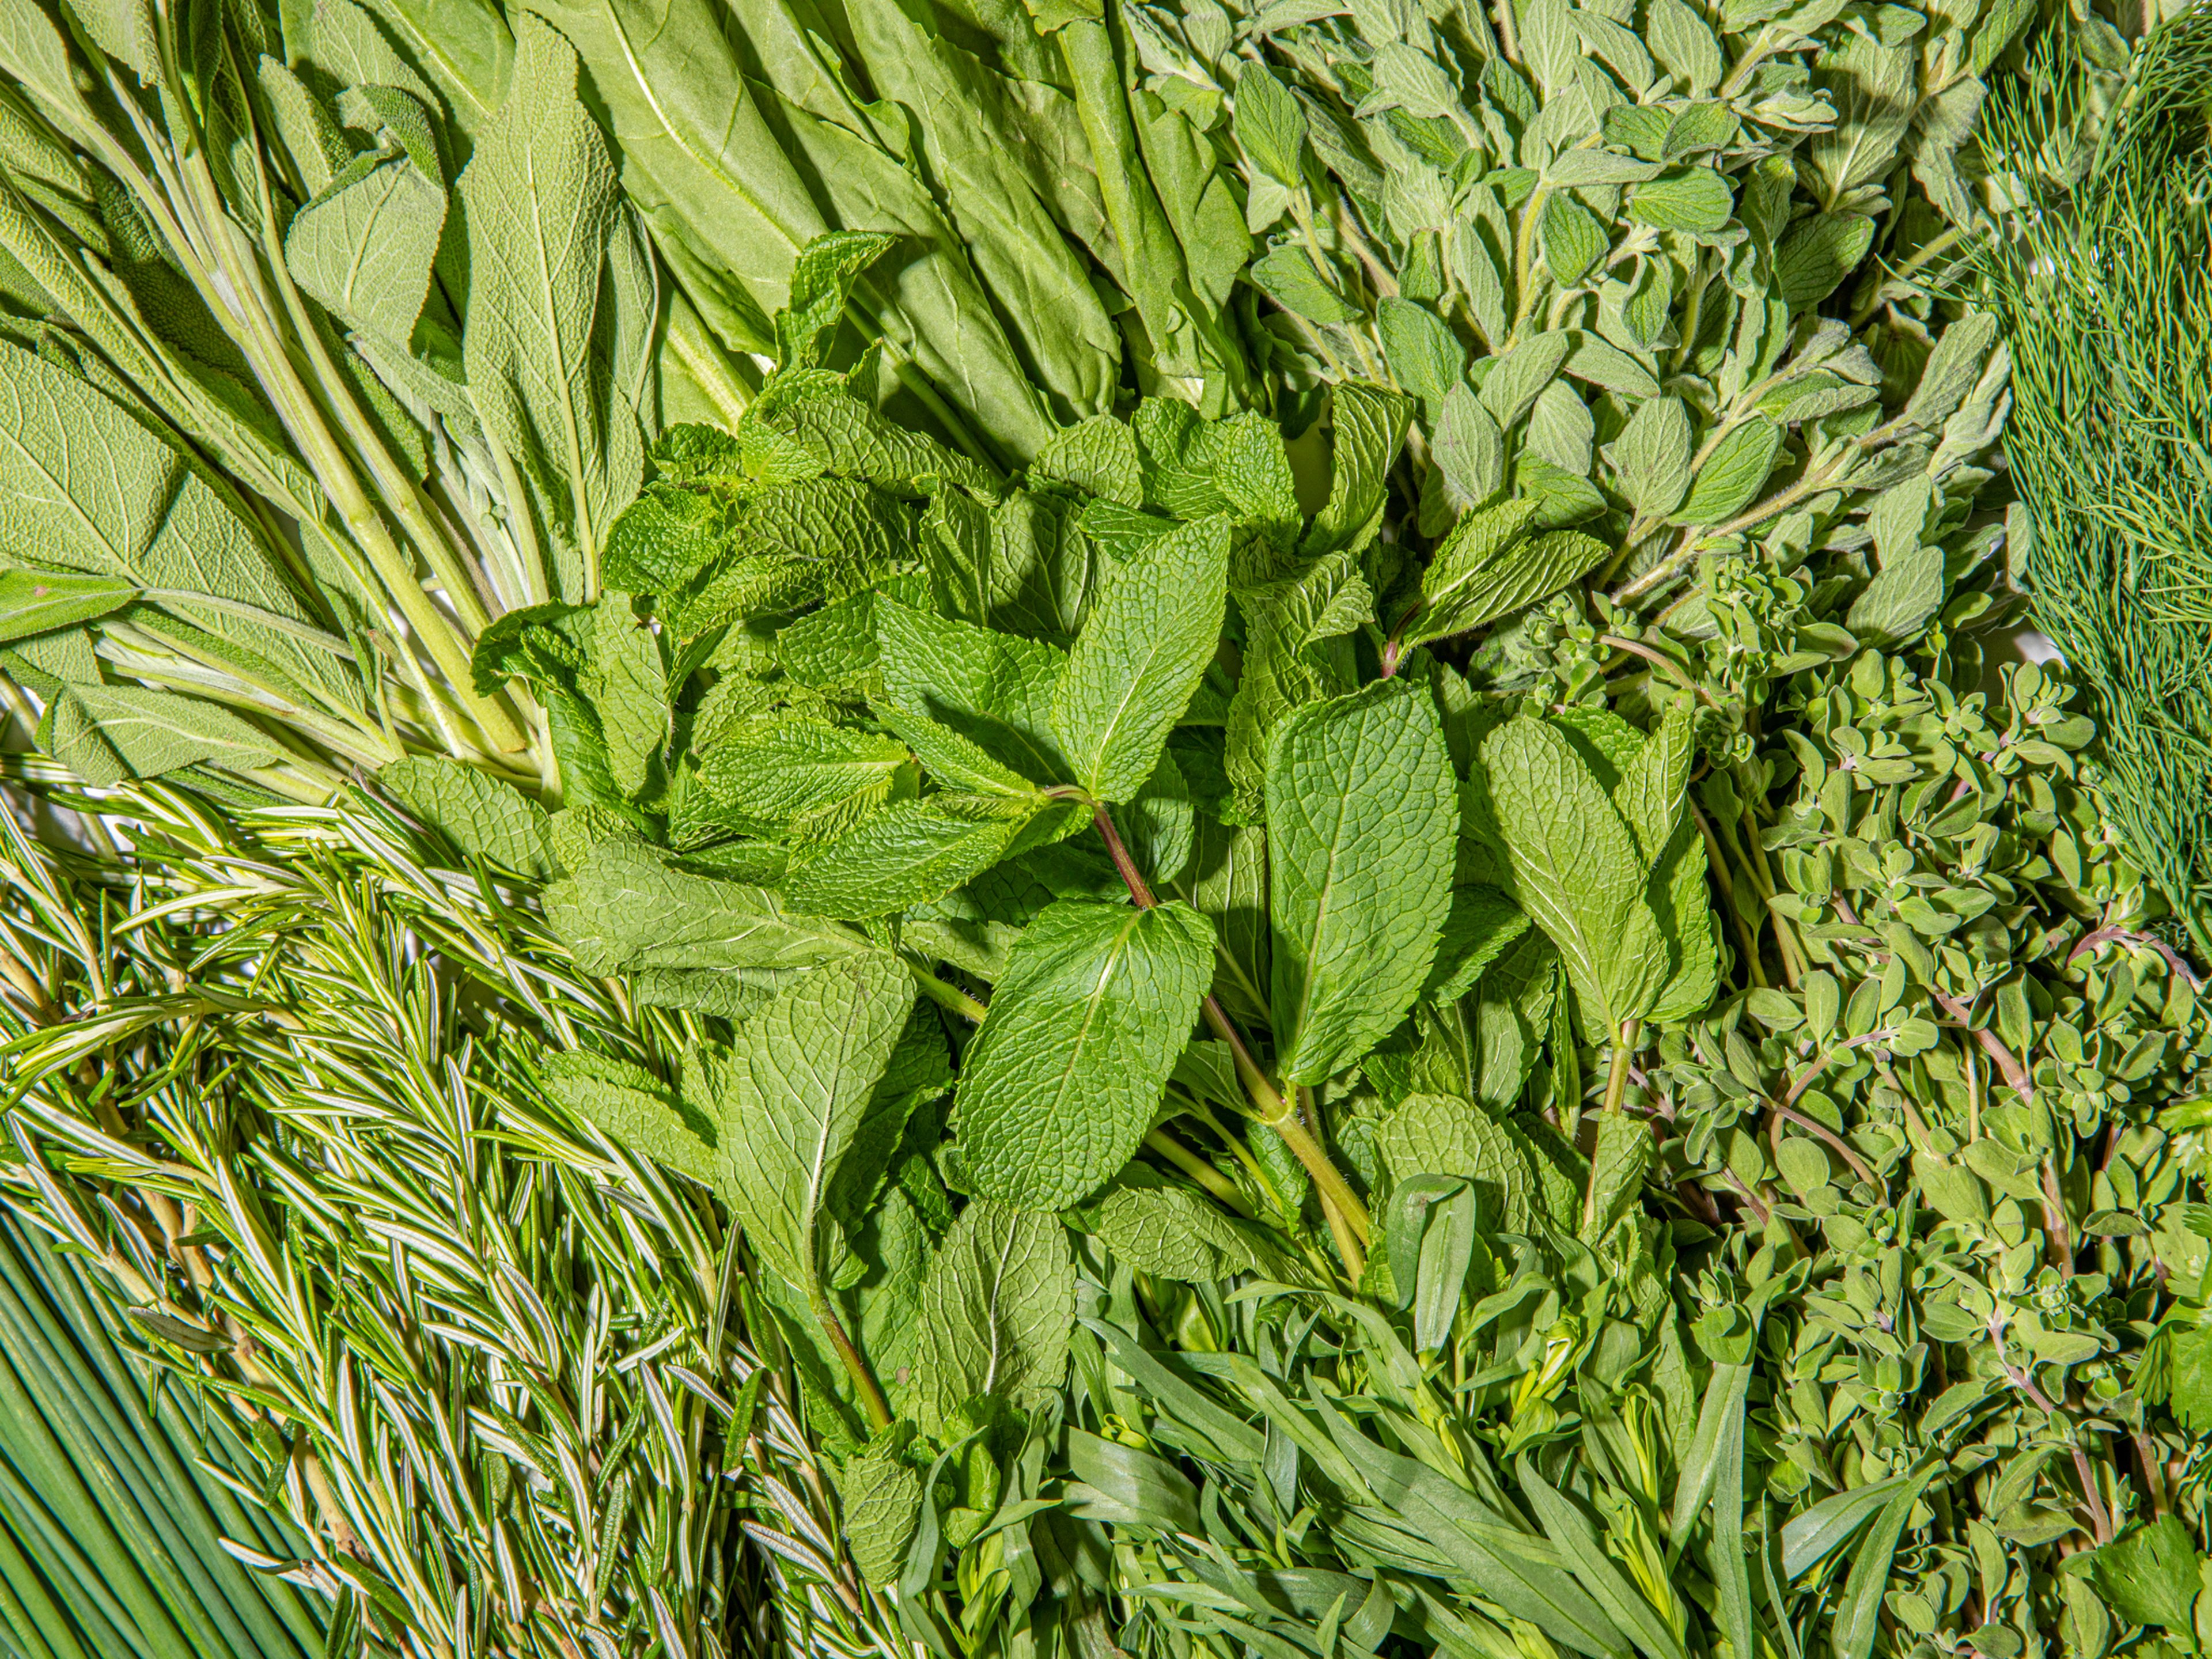 17 of Our Favorite Herbs and How to Use Them